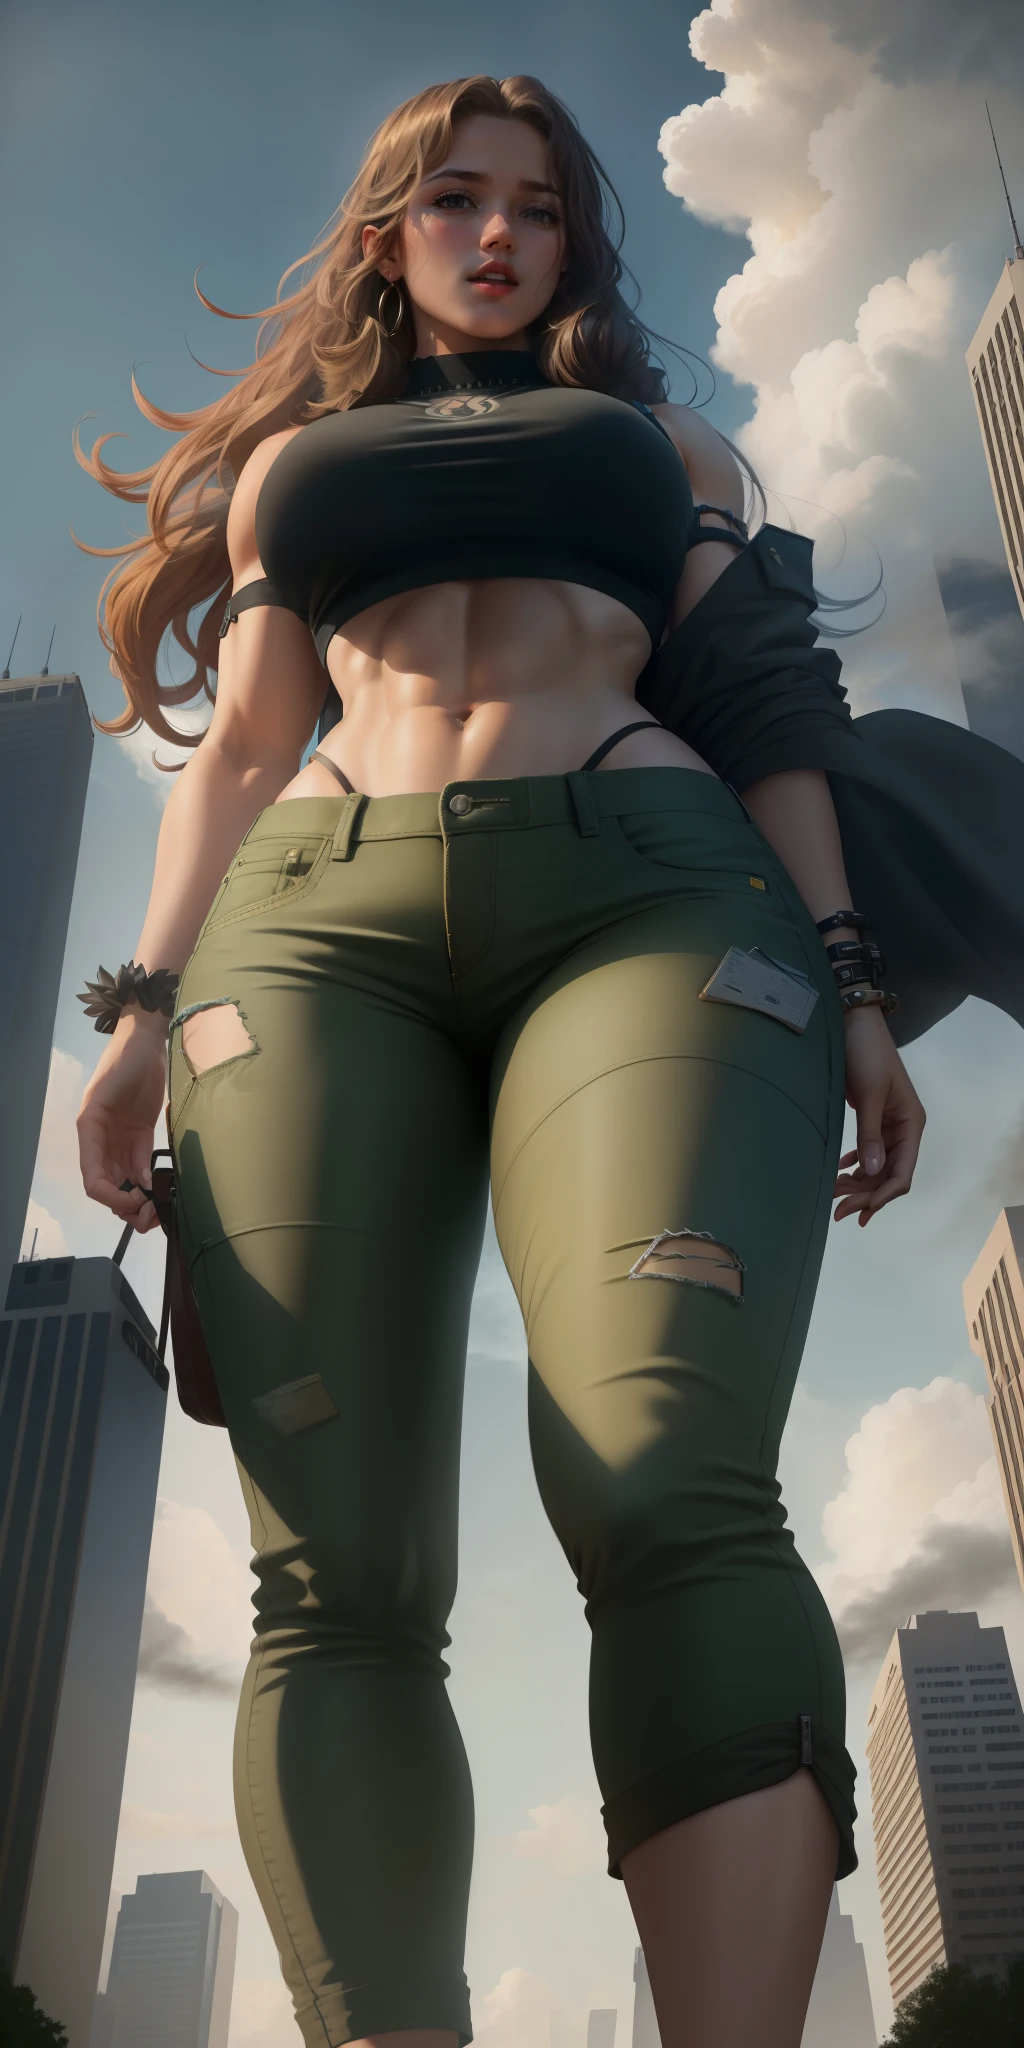 "A towering Giantess in a cool and laid-back hippie style is rocking a crop top and baggy pants. Her toned and athletic build hints at her massive strength. She seems to be casually strolling through the bustling cityscape of GTS City, as towering buildings loom overhead. Smoke and clouds roil around her, adding to the sense of epic scale and drama. The lighting is dark, gloomy, and realistic, creating a tense and ominous atmosphere. The perspective is from below, emphasizing the sheer majesty and power of the Giantess."